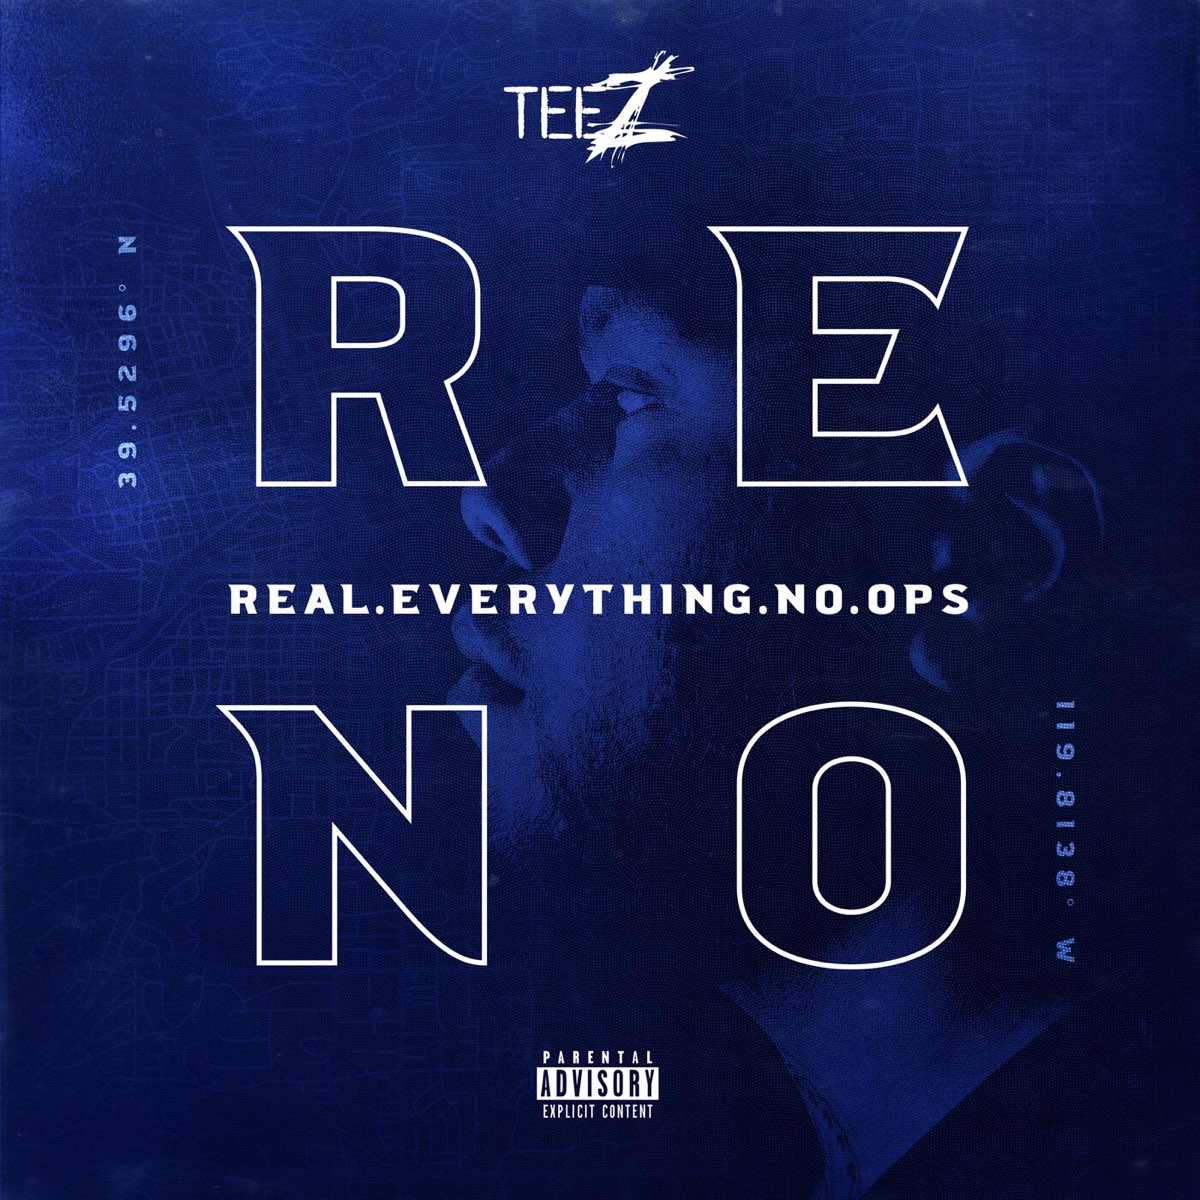 Real everything. Teez. No ops. Teez PSD.